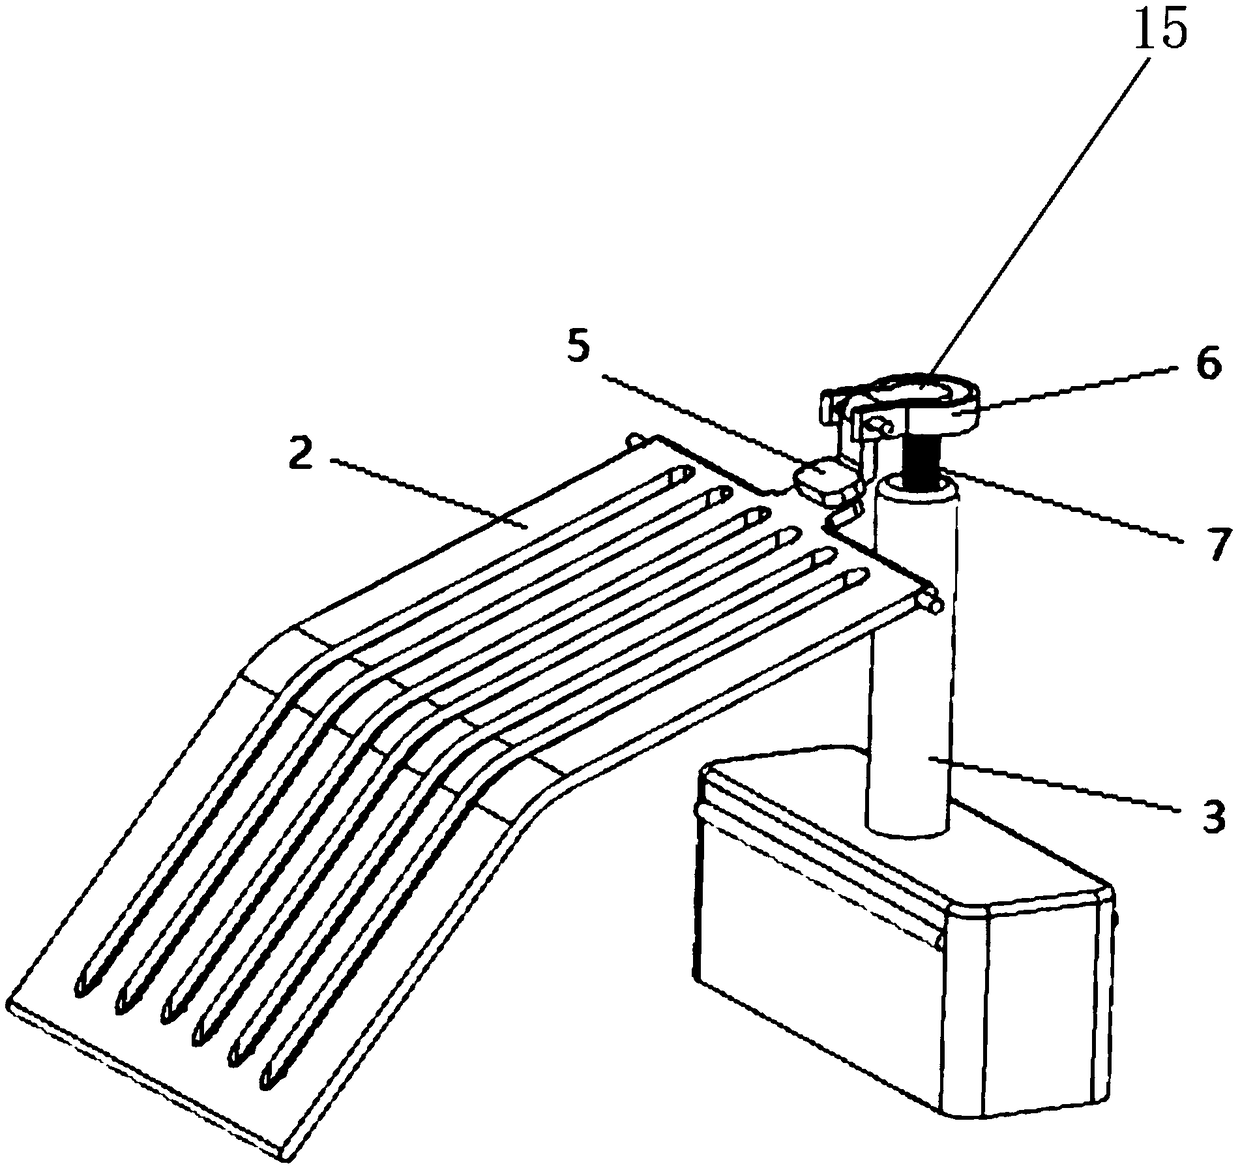 Automatic clamshell dustpan